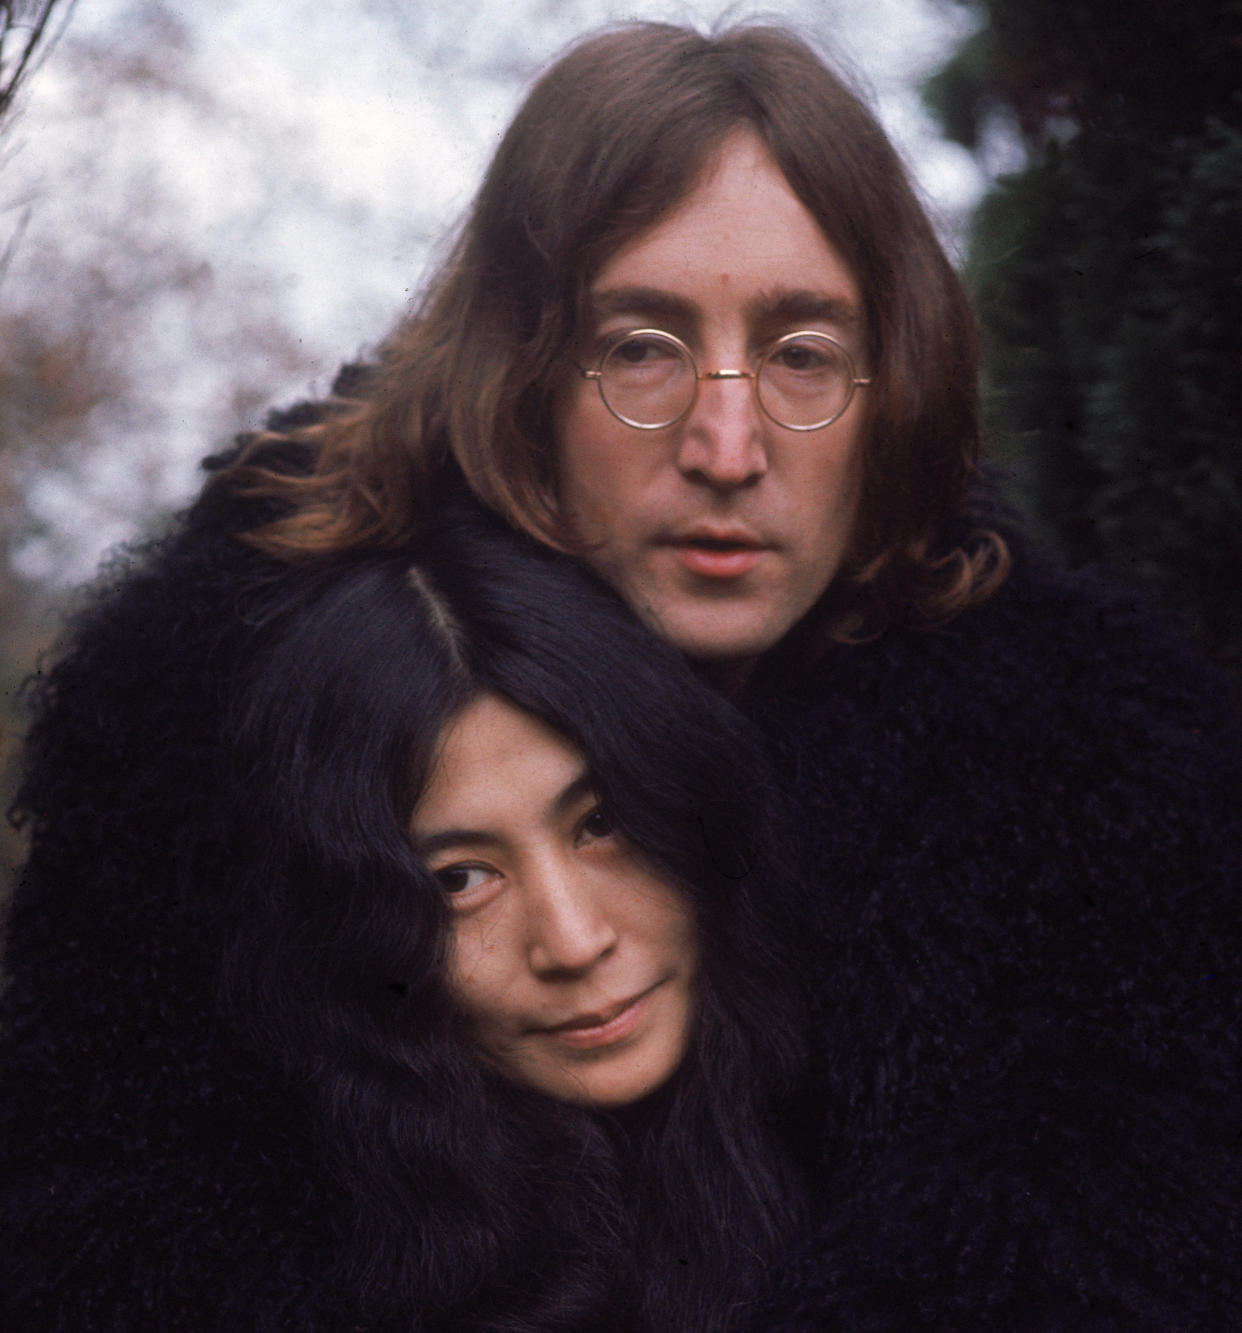 John Lennon and Yoko Ono in 1968. (Susan Wood/Getty Images via Getty Images)